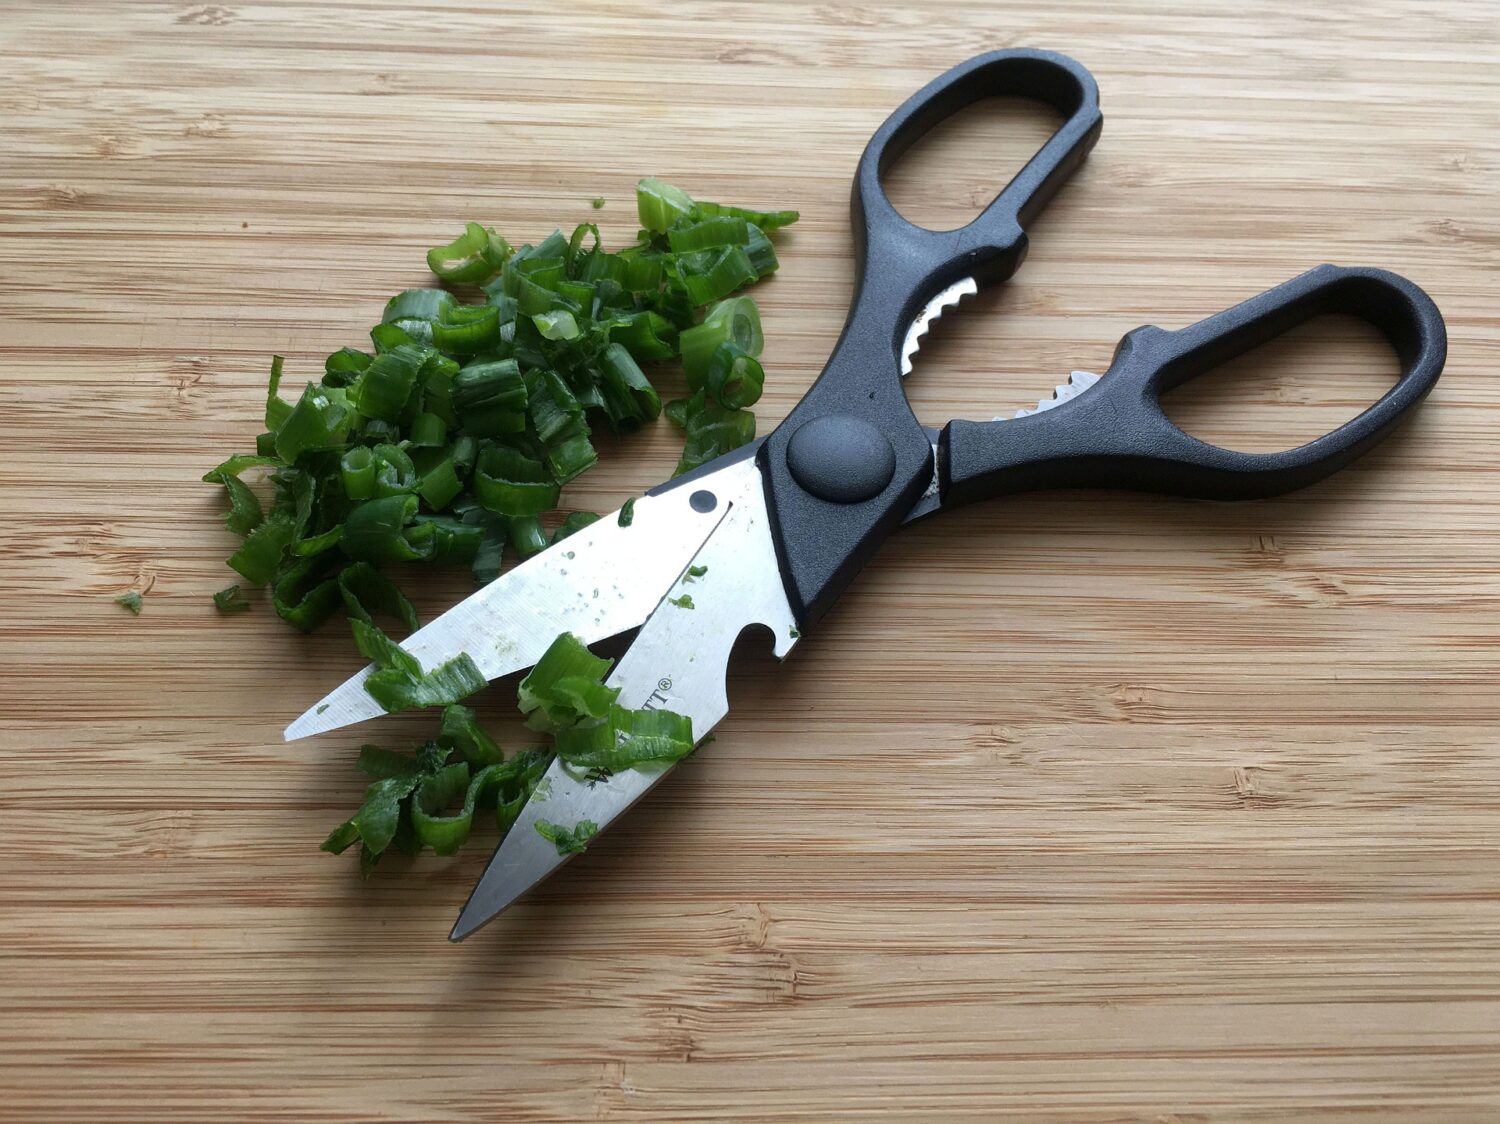 How To Disinfect Kitchen Shears And Scissors